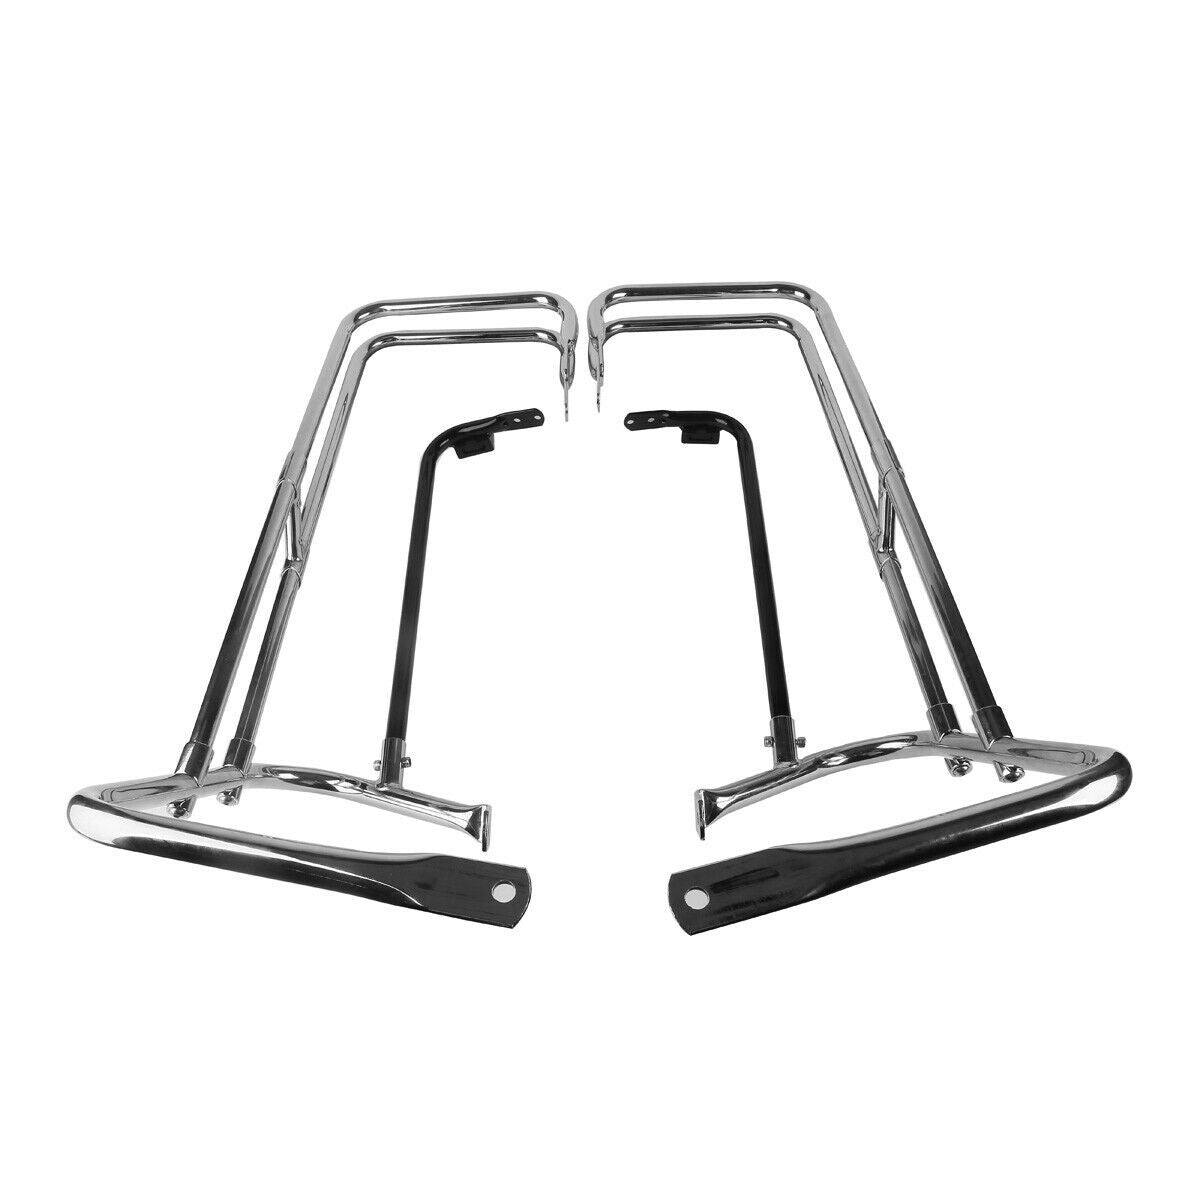 SaddleBags Guard Rail Bracket Fit For Harley Street Electra Glide 1998-2008 2006 - Moto Life Products